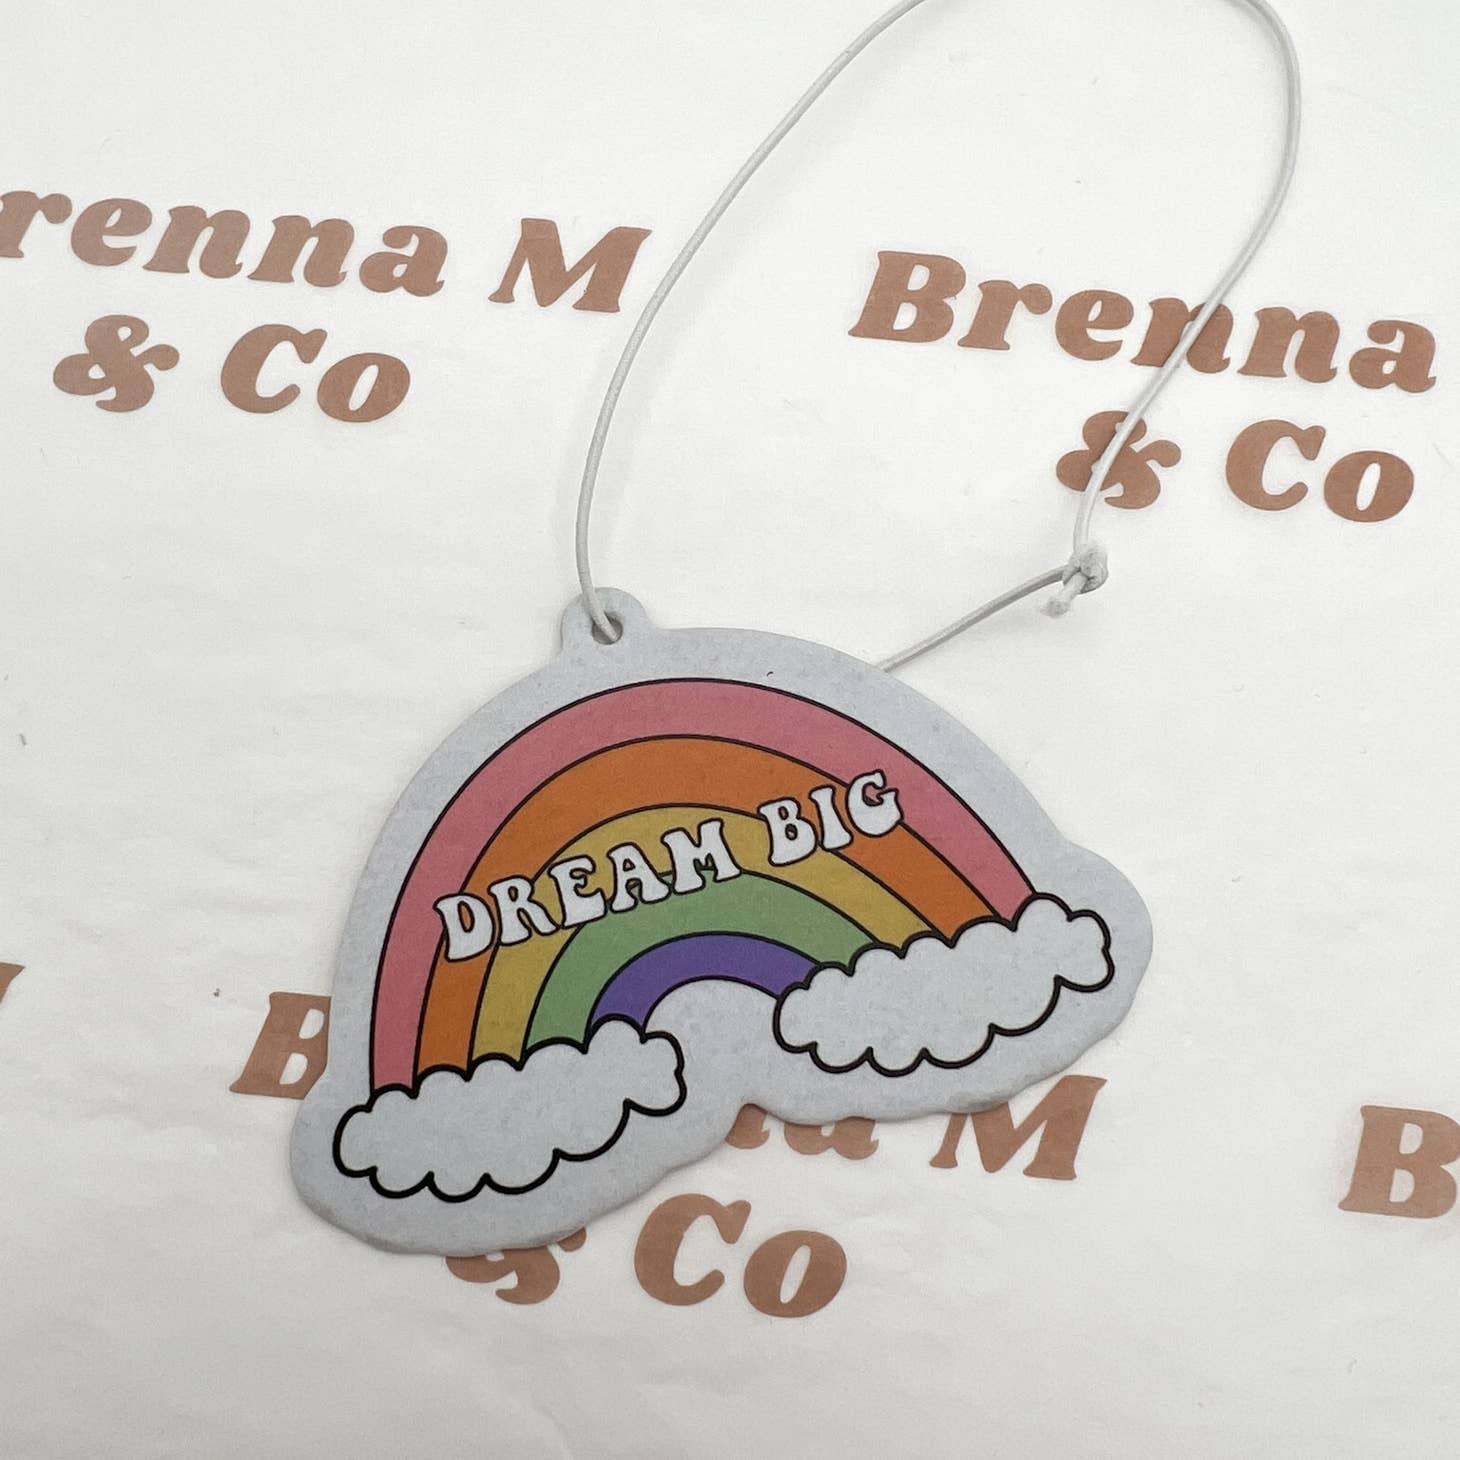 Car Air Fresheners - Storm and Sky Shoppe - Brenna M & Co